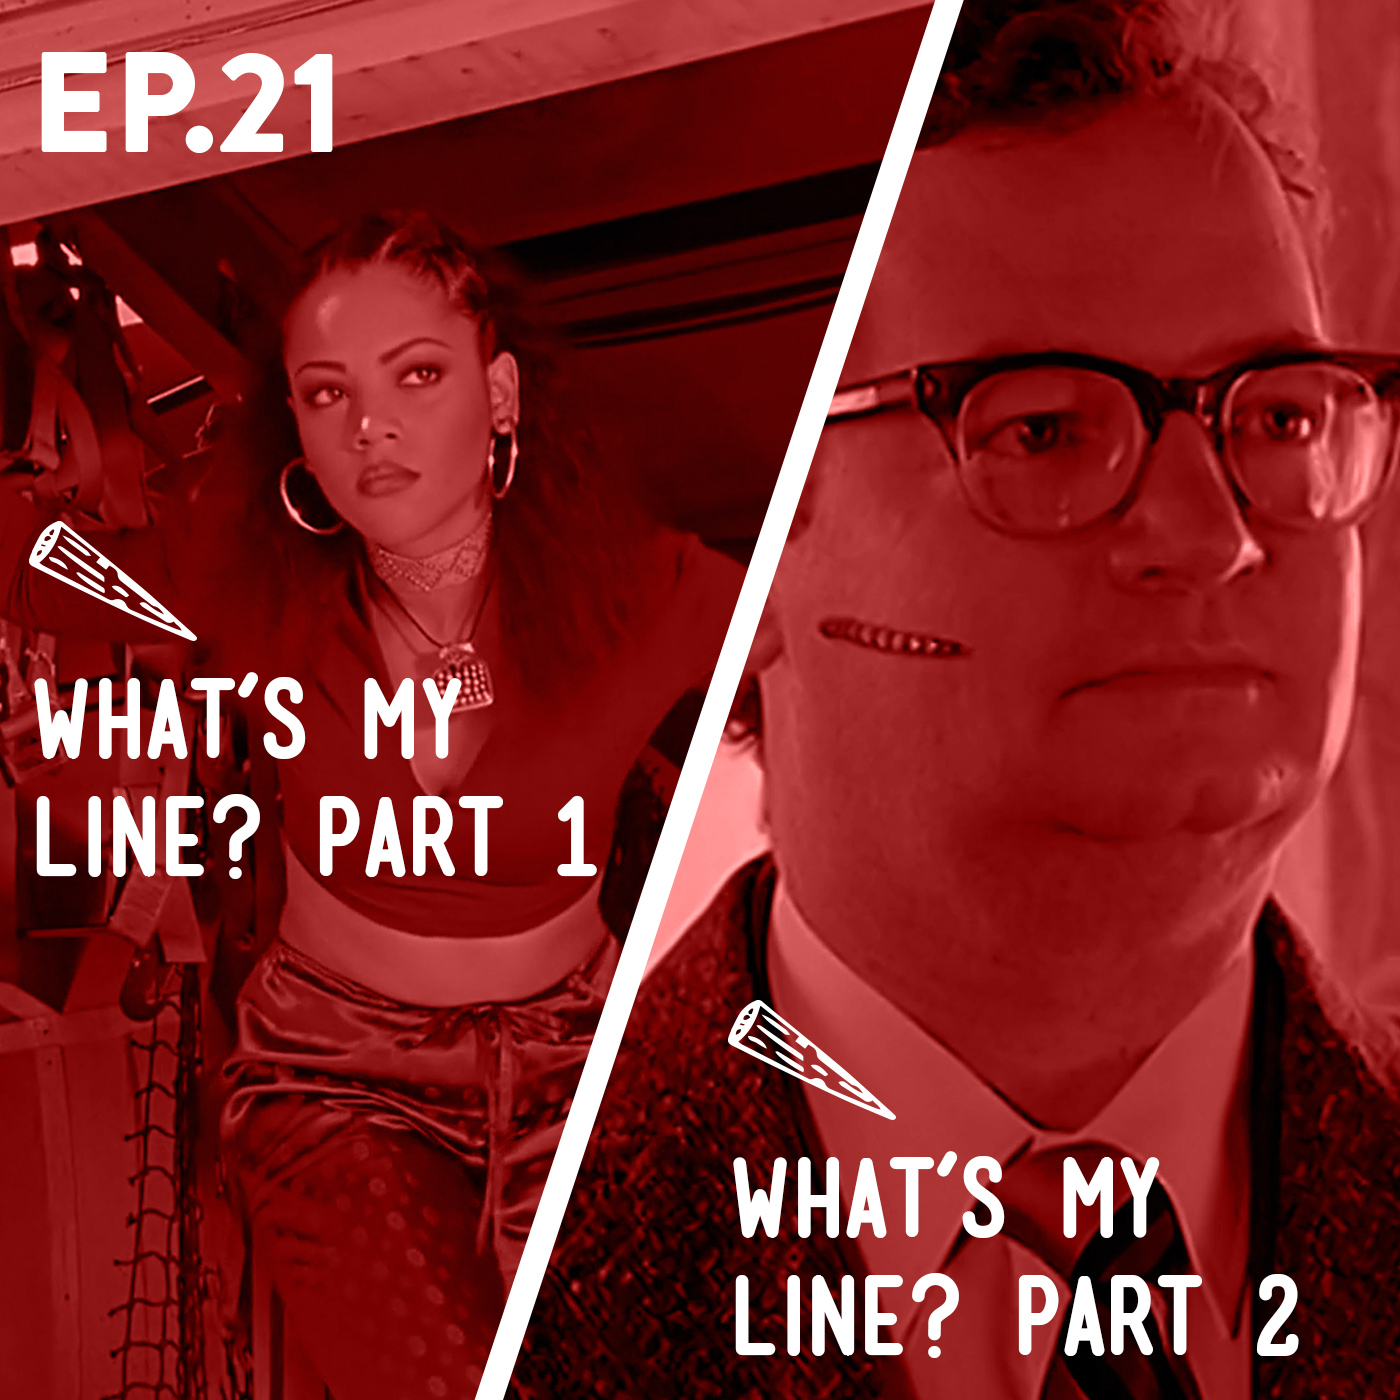 21 - What’s My Line? Parts 1 & 2 (Buffy only)